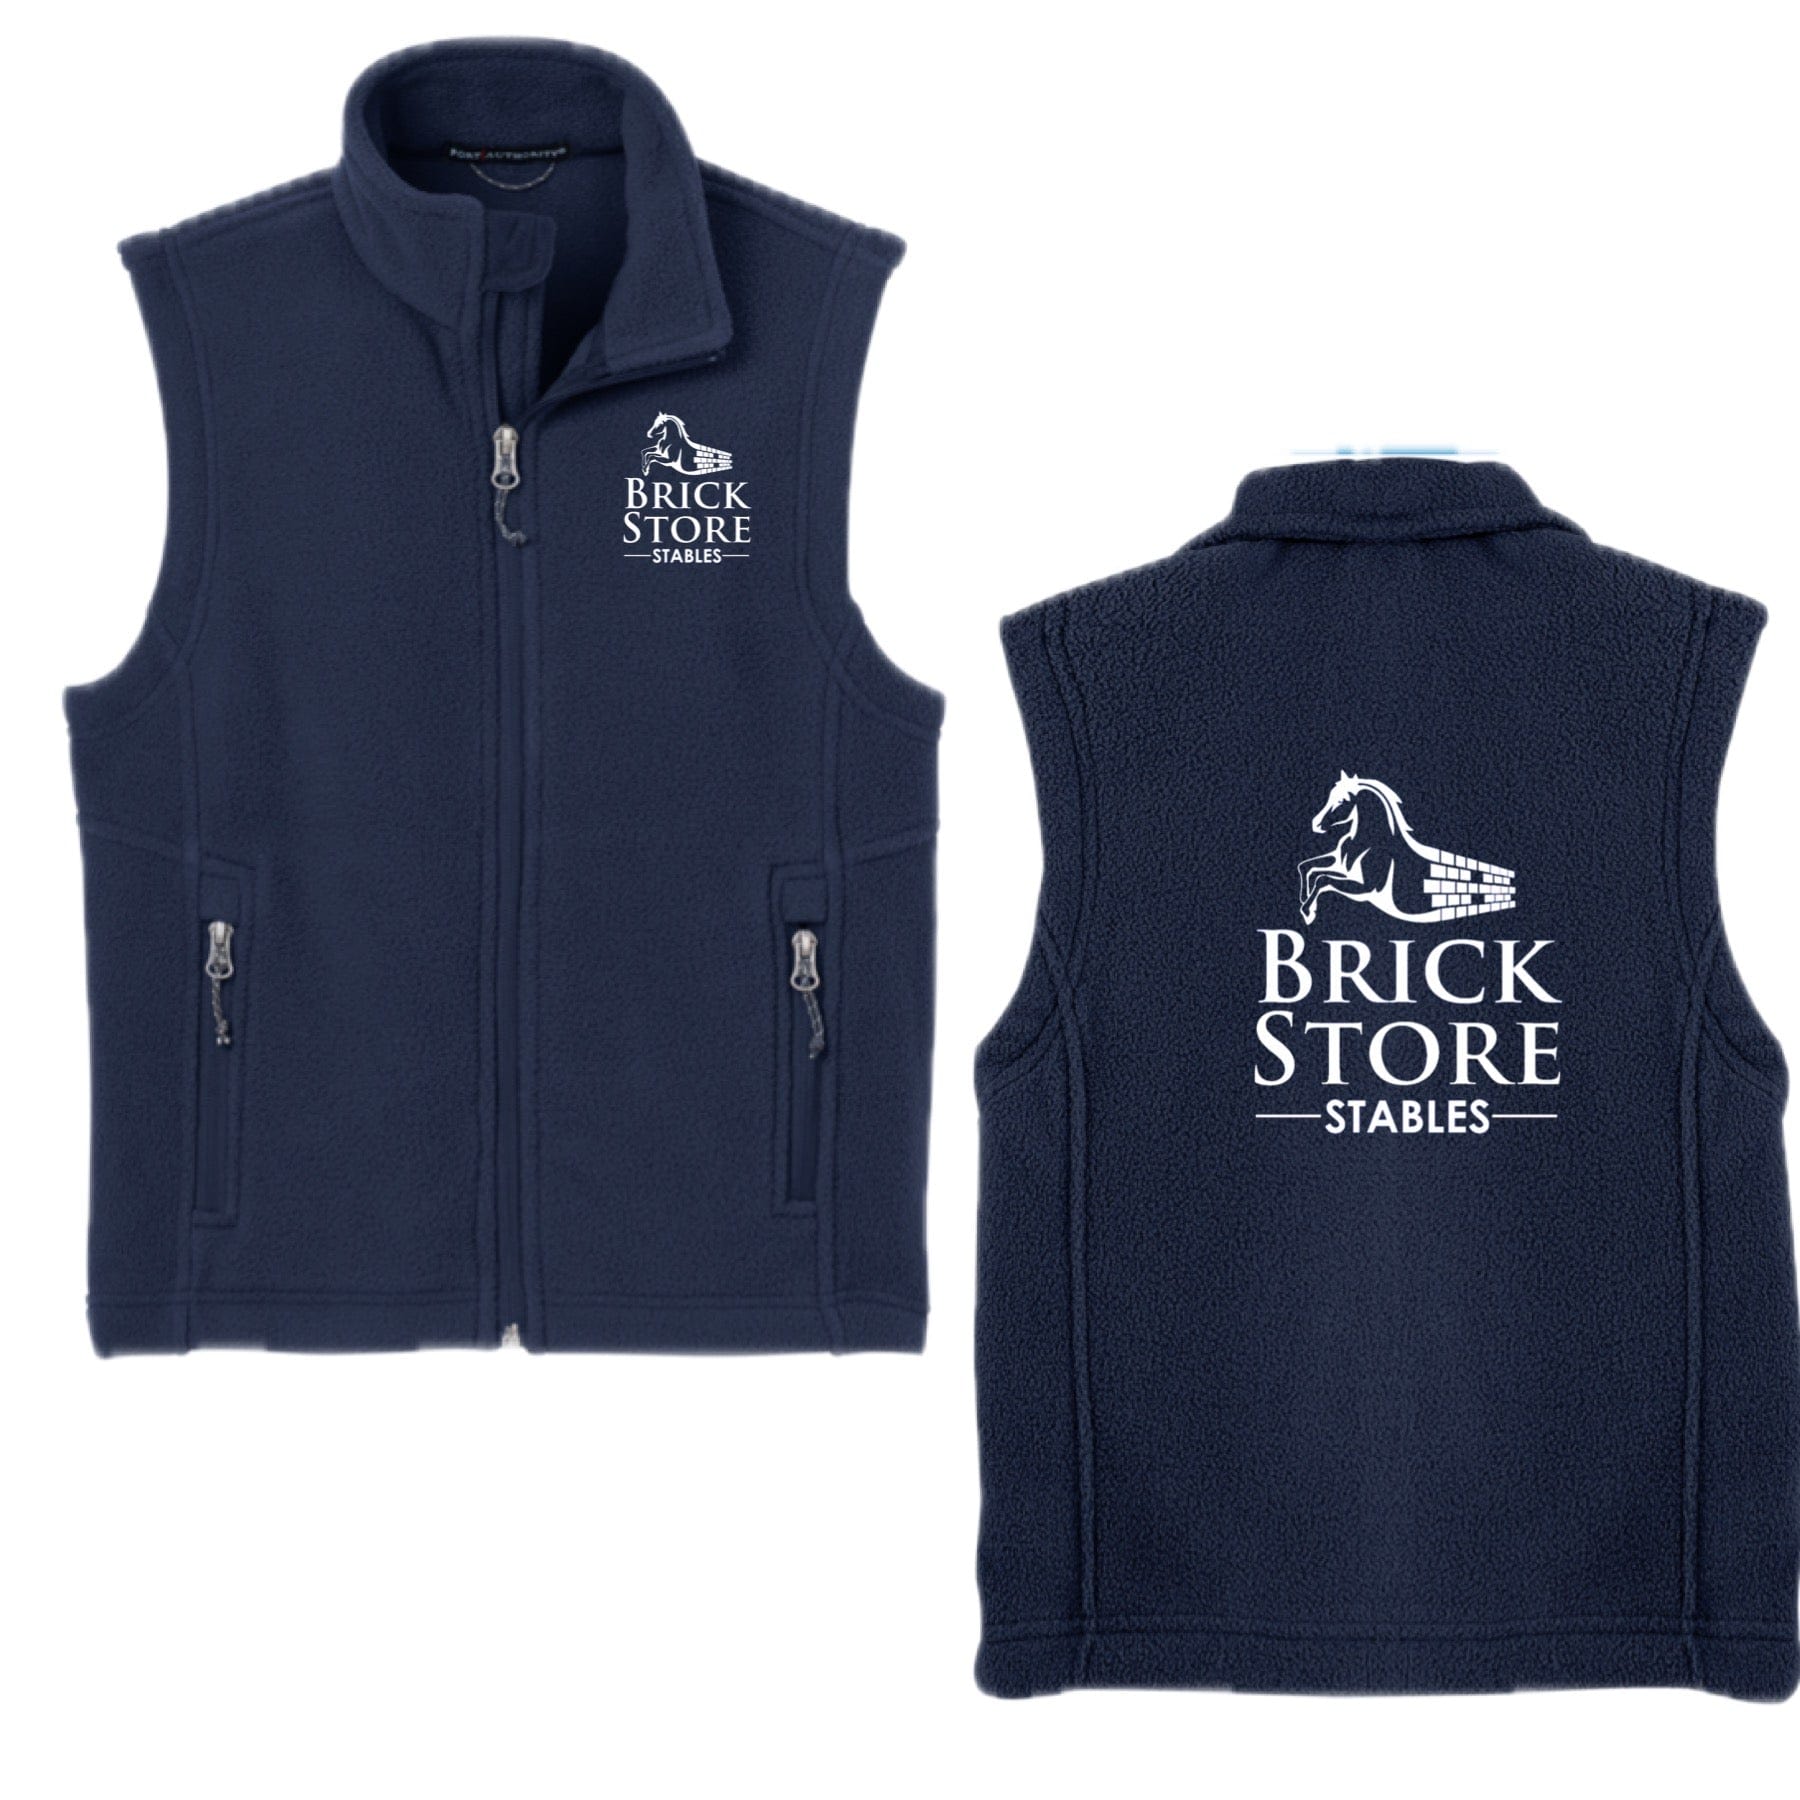 Equestrian Team Apparel Brick Store Stables Youth Fleece Vest equestrian team apparel online tack store mobile tack store custom farm apparel custom show stable clothing equestrian lifestyle horse show clothing riding clothes horses equestrian tack store